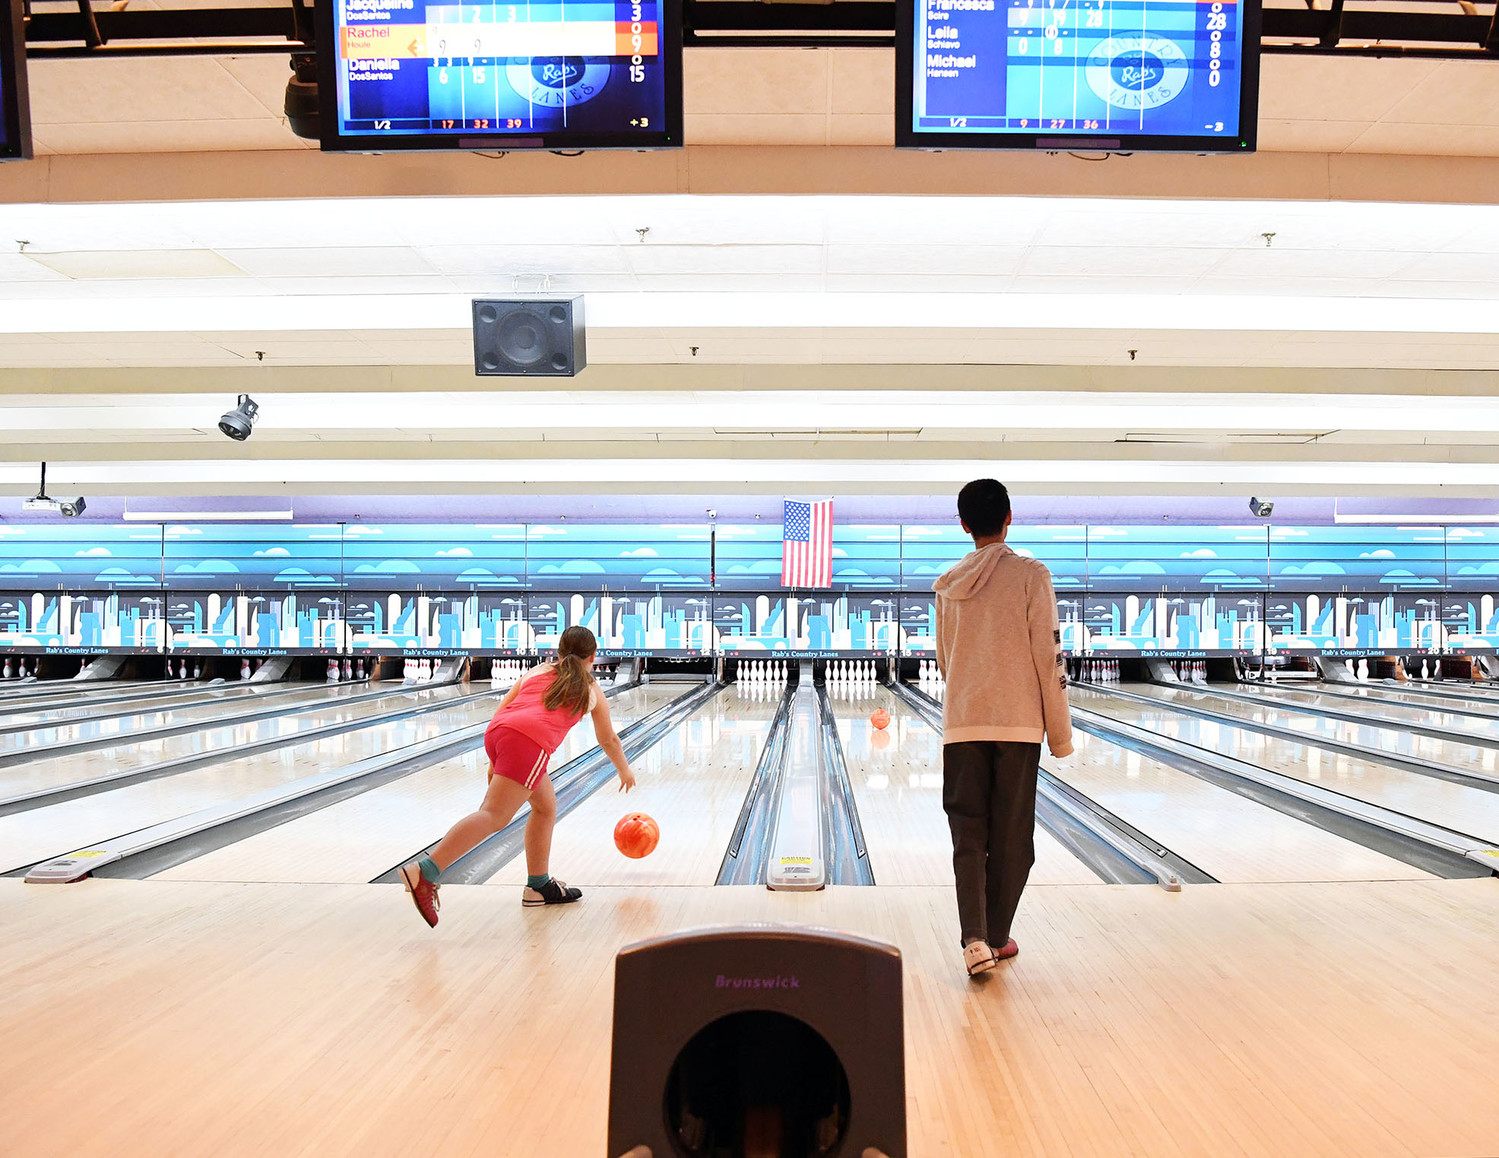 Bowlers aim for strikes during Staten Island CYO bowling league action at Rab’s Country Lanes on Staten Island April 17. Staten Island CYO started last fall its fun and popular bowling program, the only CYO bowling league in the archdiocese.